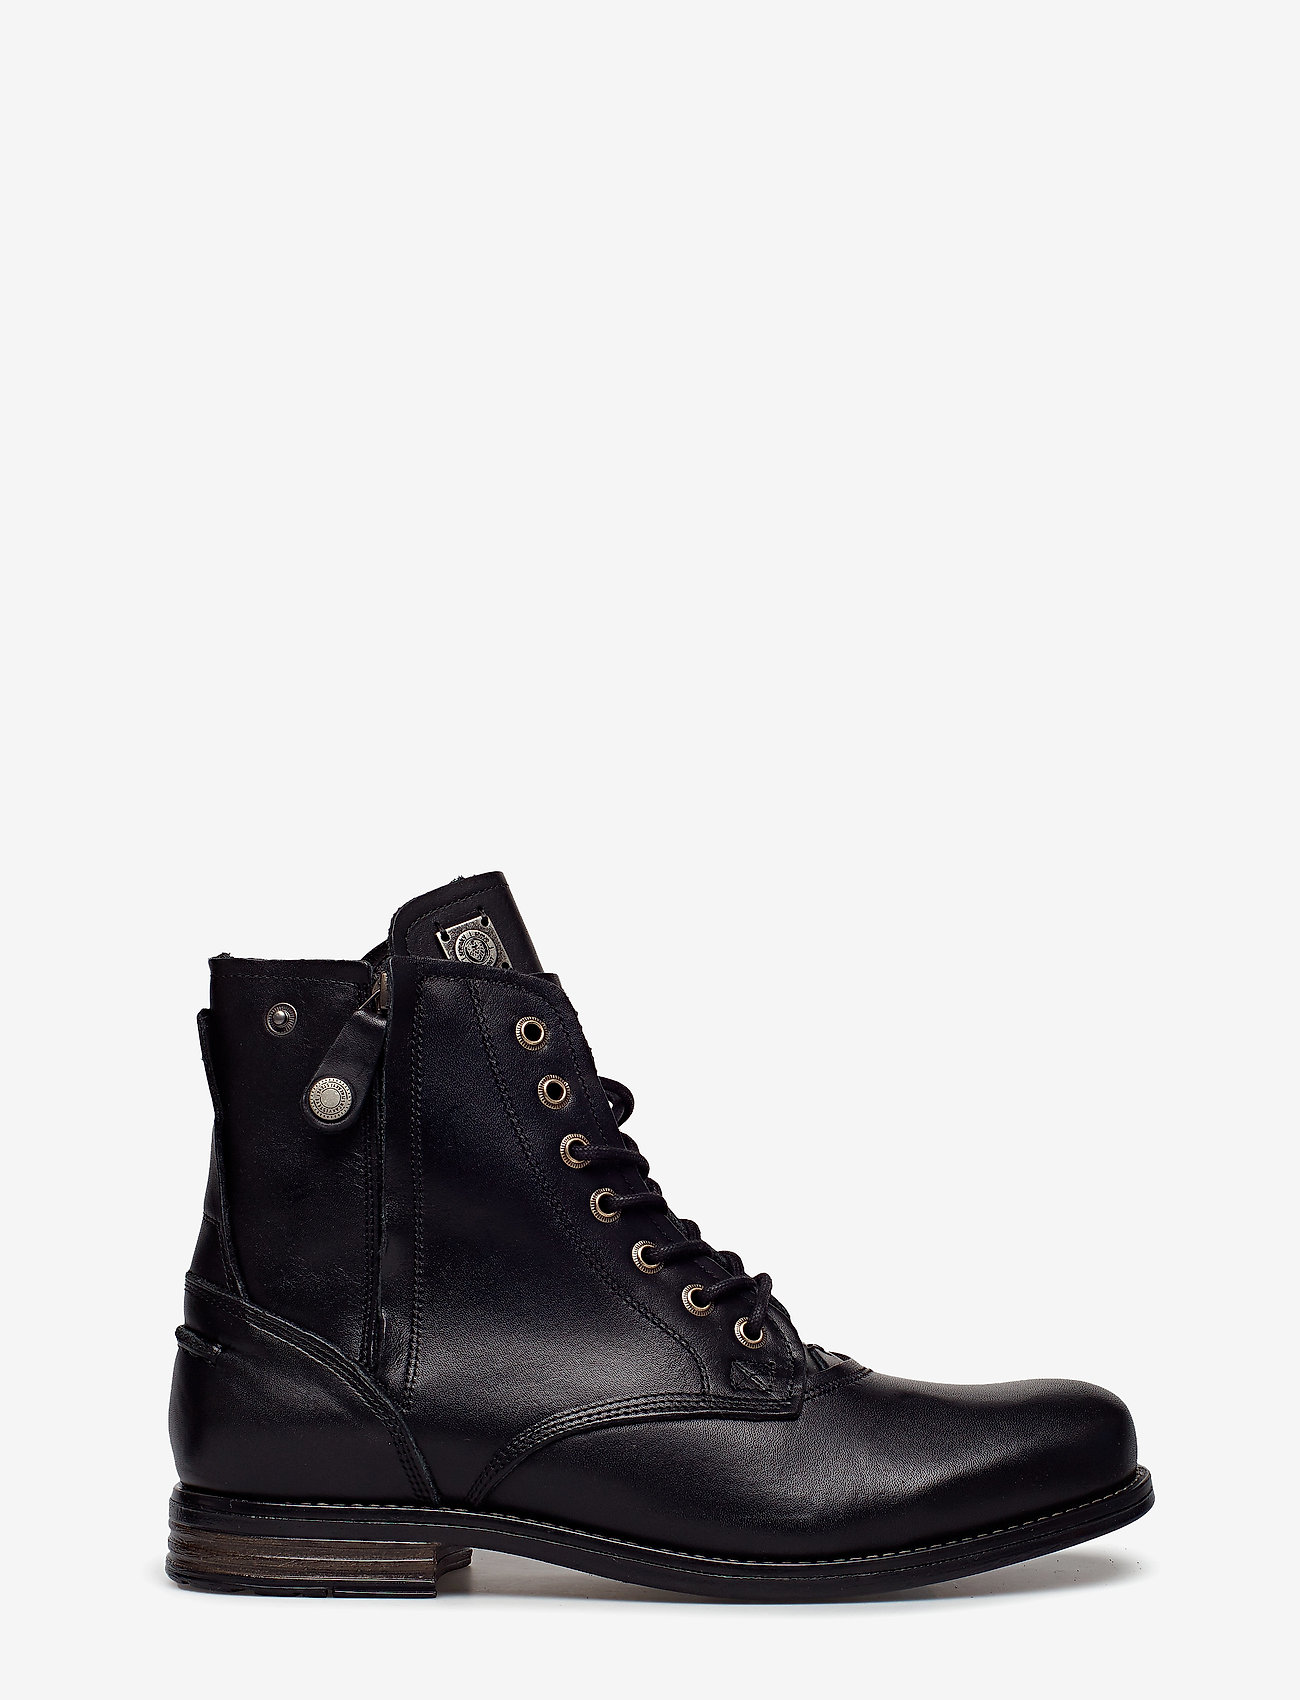 Sneaky Steve Kingdom Leather Shoe - Laced boots | Boozt.com